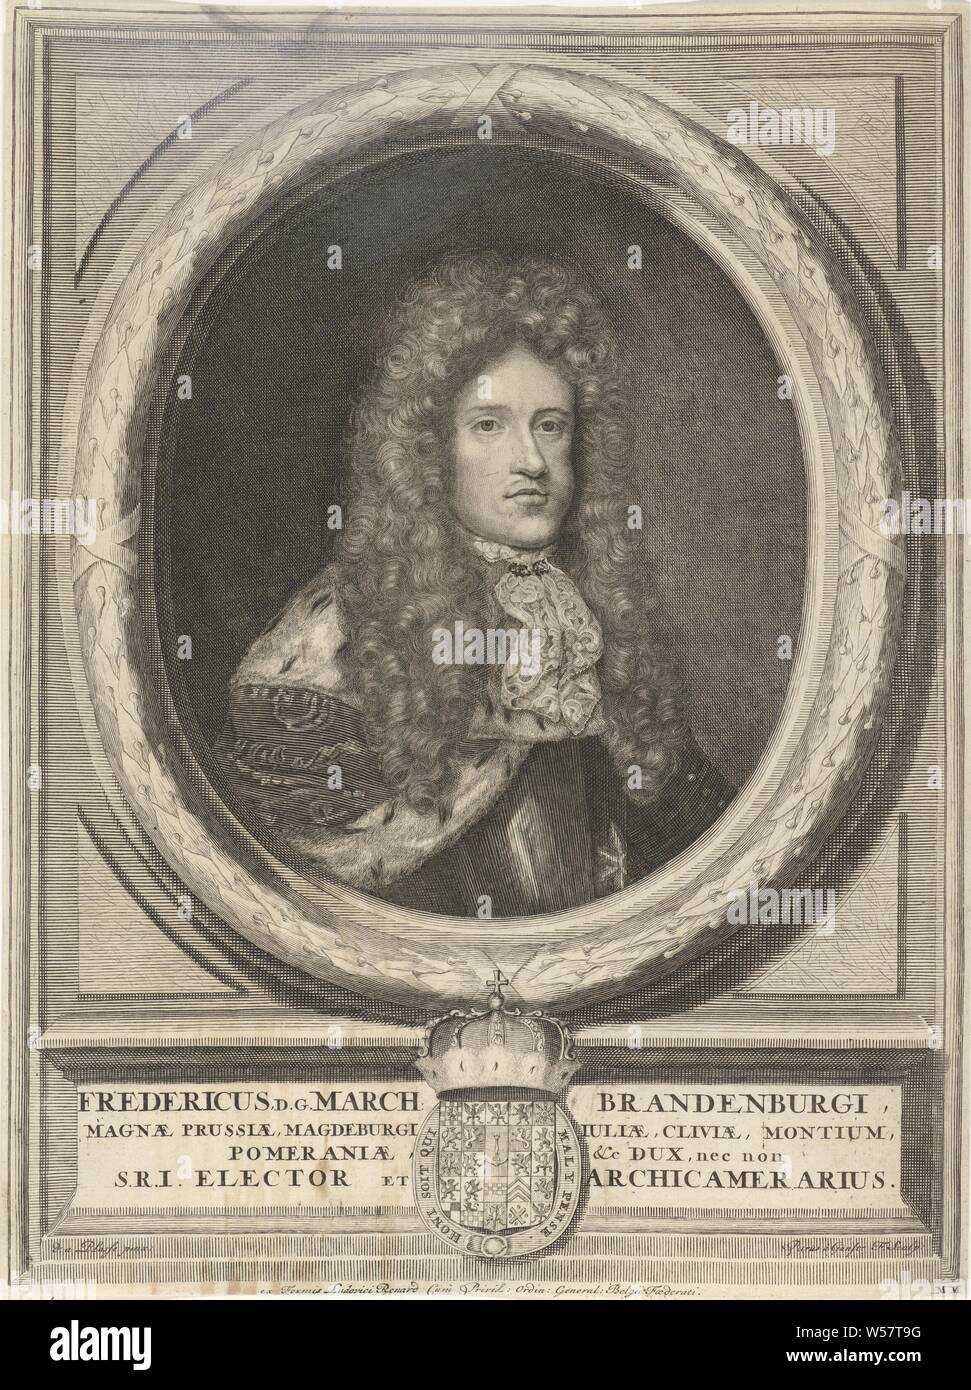 Portrait of Frederick I of Prussia, Frederick I, King of Prussia and as Frederick III, Elector of Brandenburg. Below the portrait are coat of arms, Frederick I king of Prussia, Pieter van Gunst (mentioned on object), Amsterdam, 1708 - 1711, paper, engraving, w 278 mm × h 368 mm Stock Photo